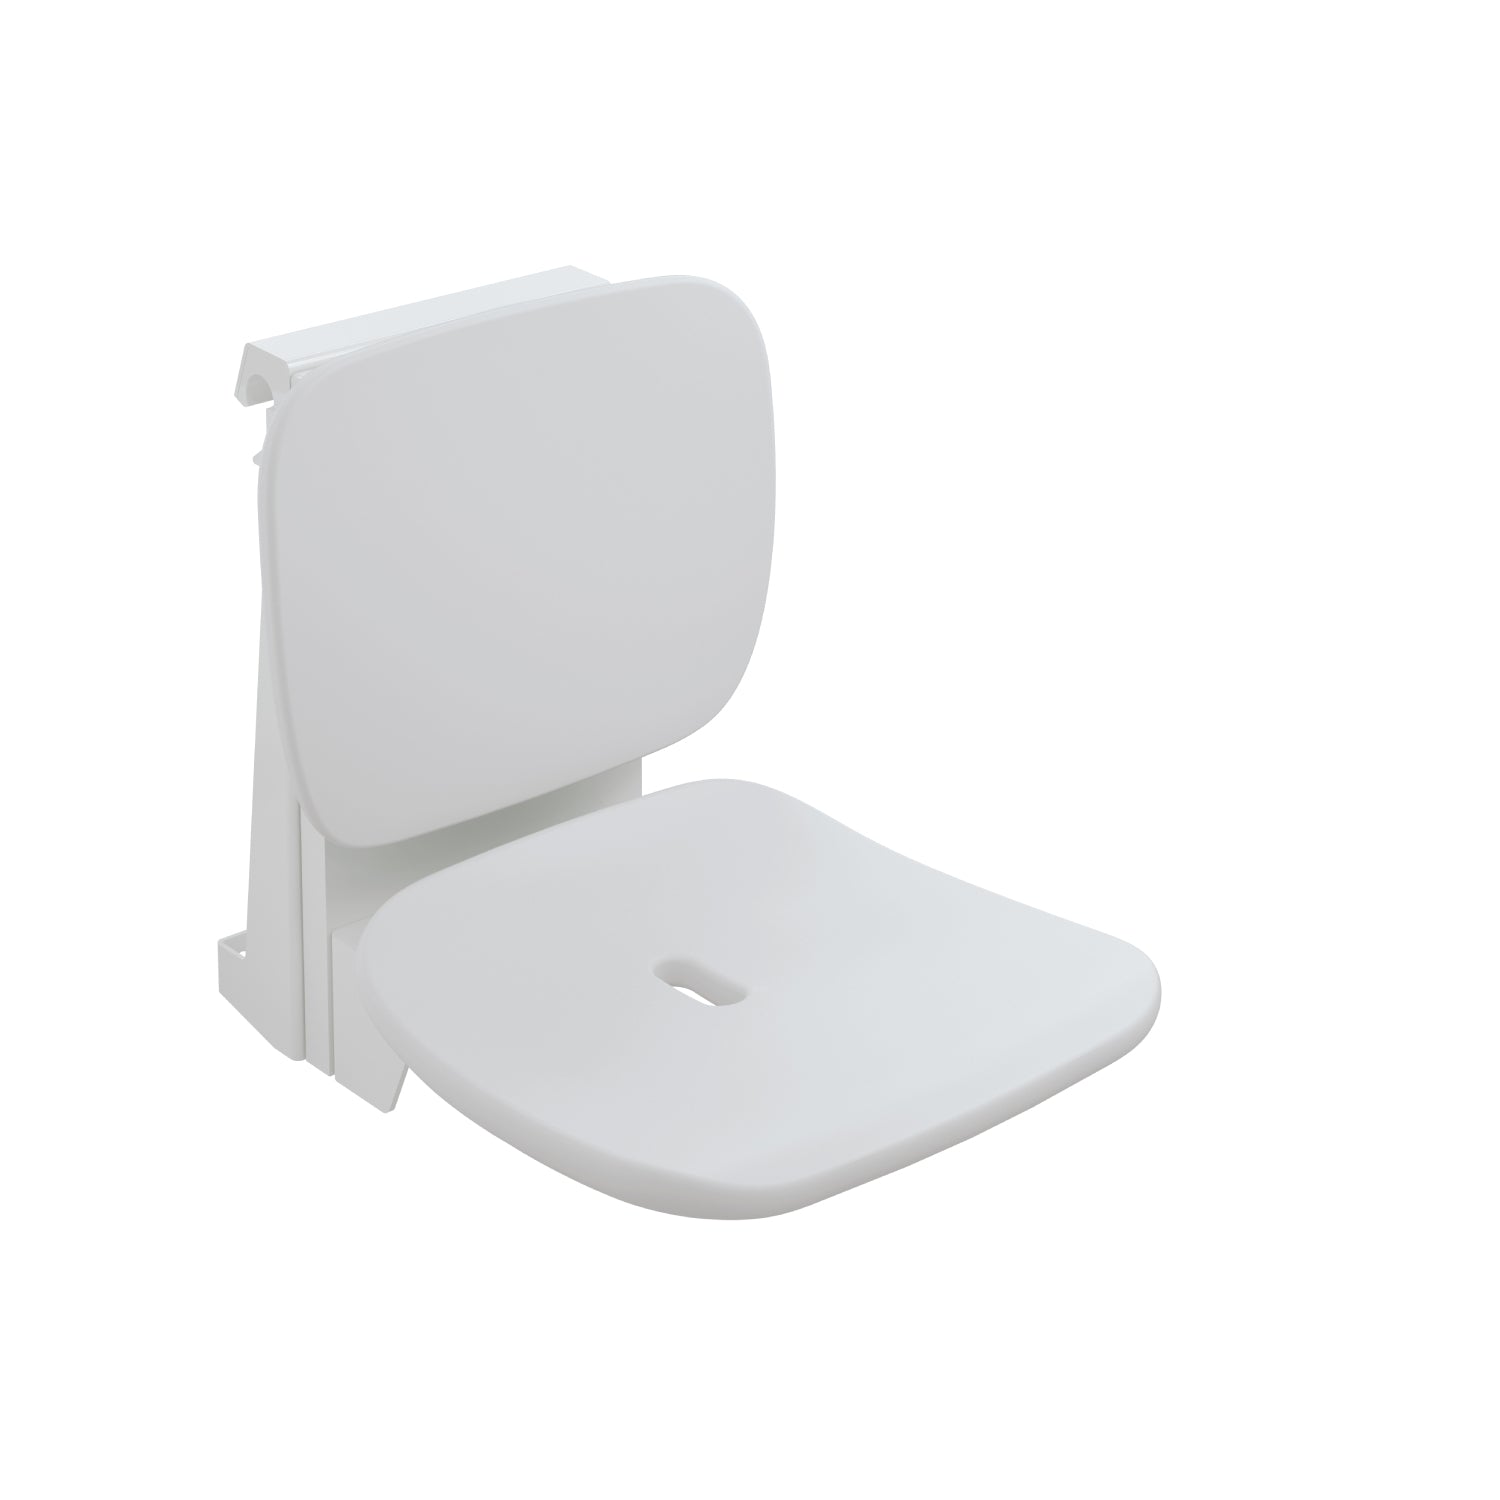 Desergo adjustable slim hanging seat with a white finish and no cut-out on a white background